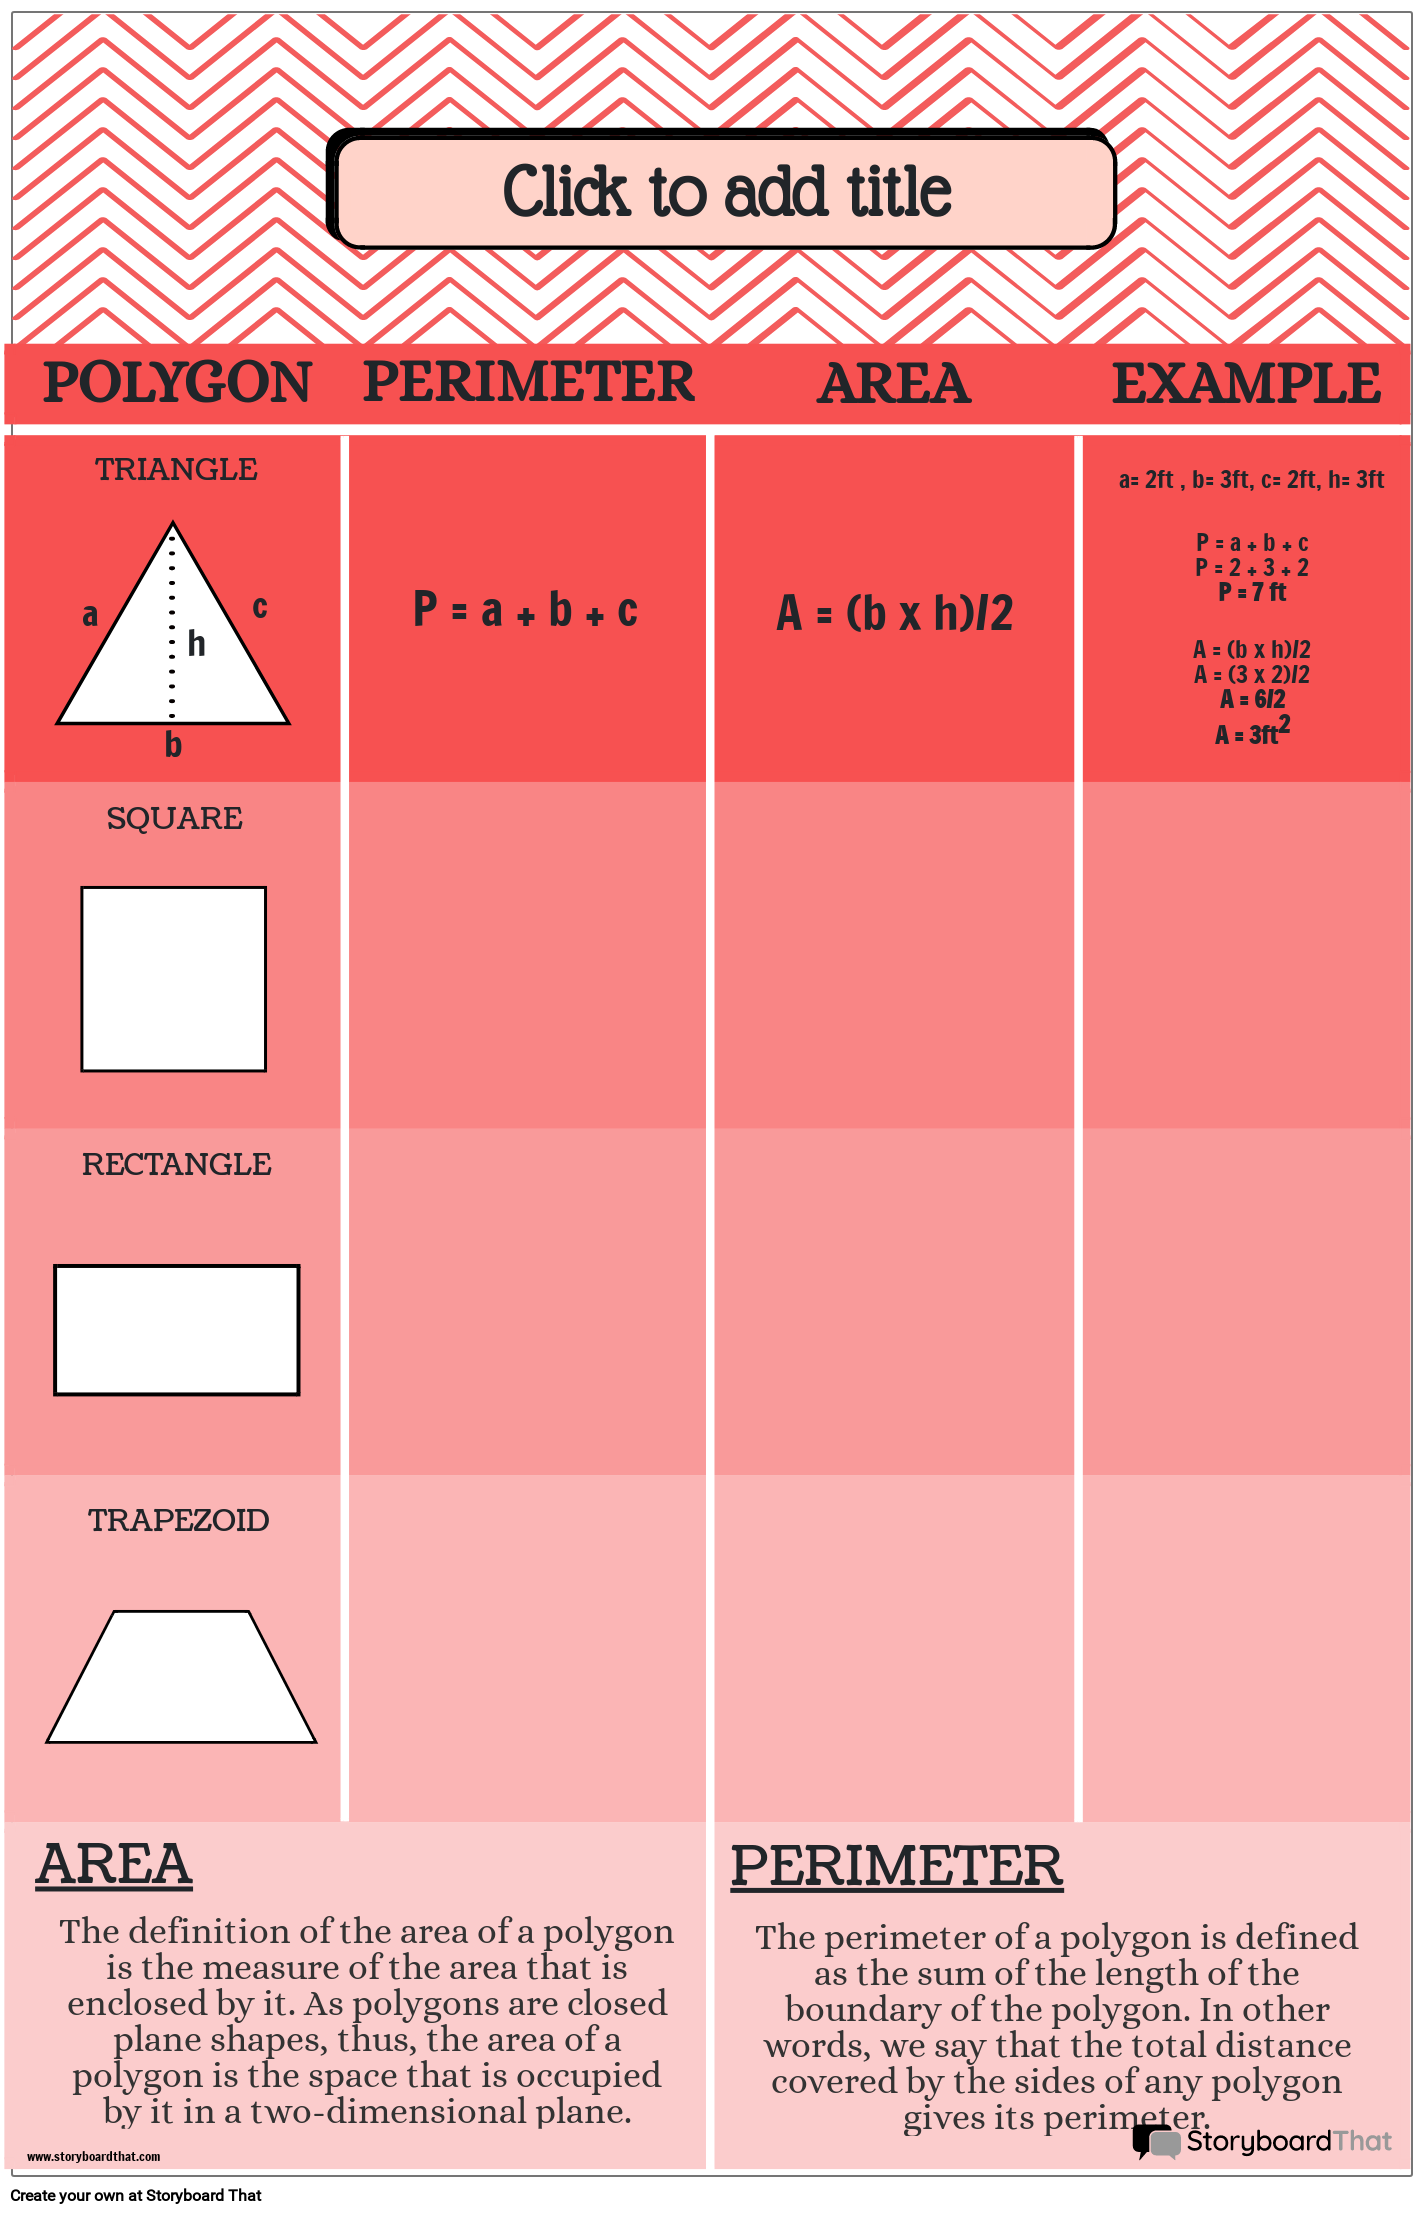 Pink themed Geometry Poster